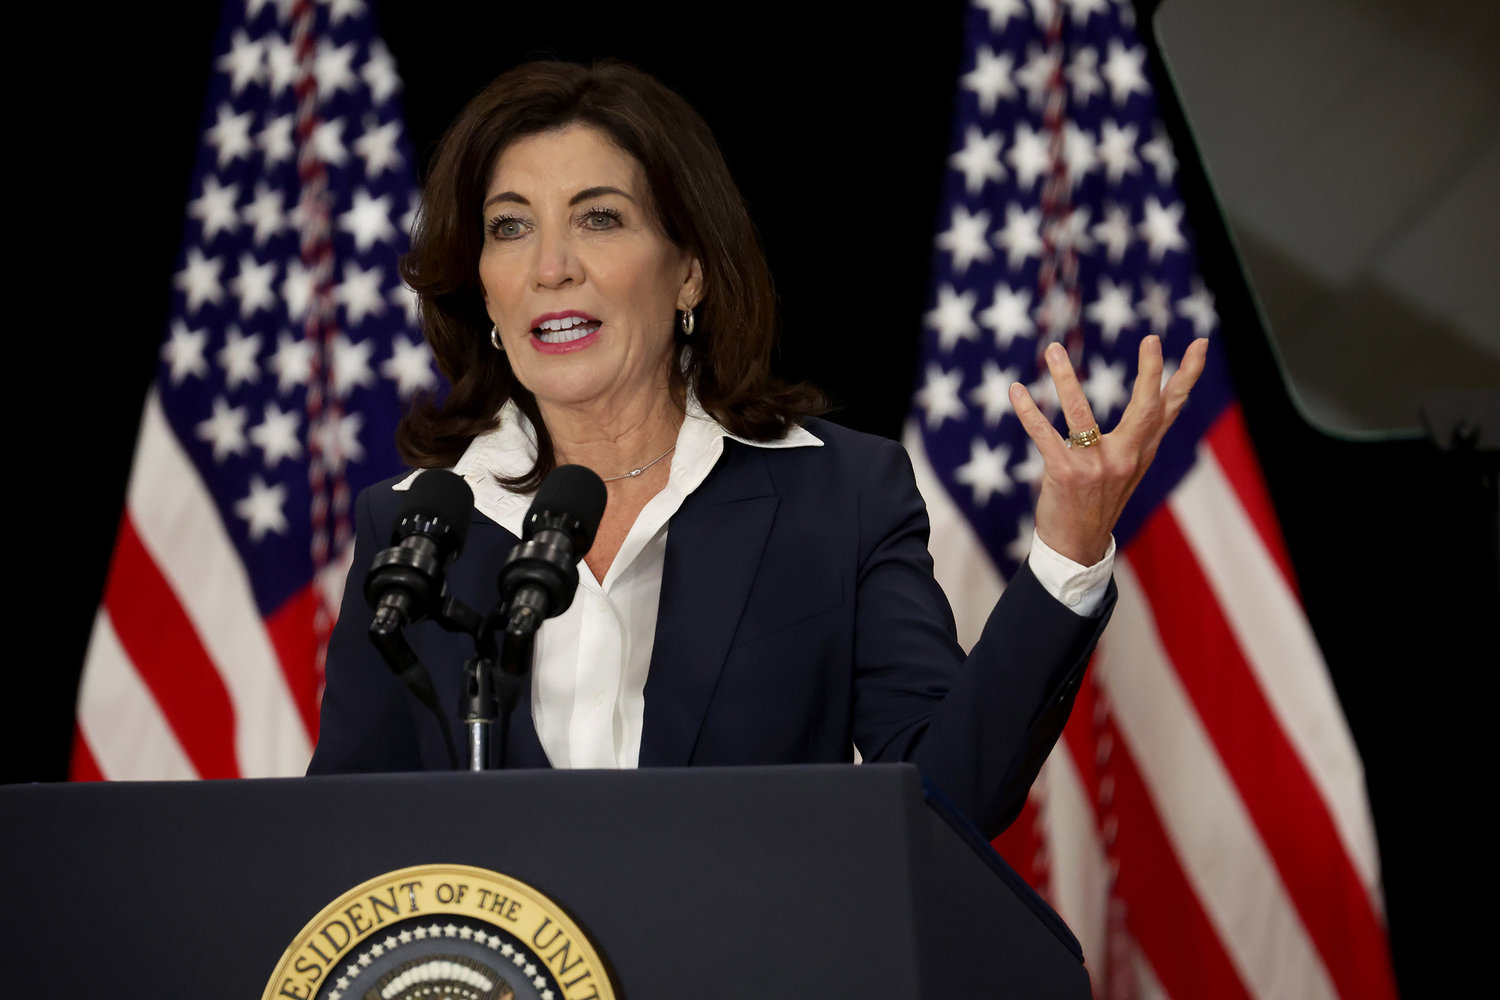 New York Gov. Kathy Hochul speaks on May 17, 2022, in Buffalo, New York. On Monday, she led a memorial ceremony to mark New York City's 20th anniversary of the final cleanup from 9/11. (Scott Olson/Getty Images/TNS)